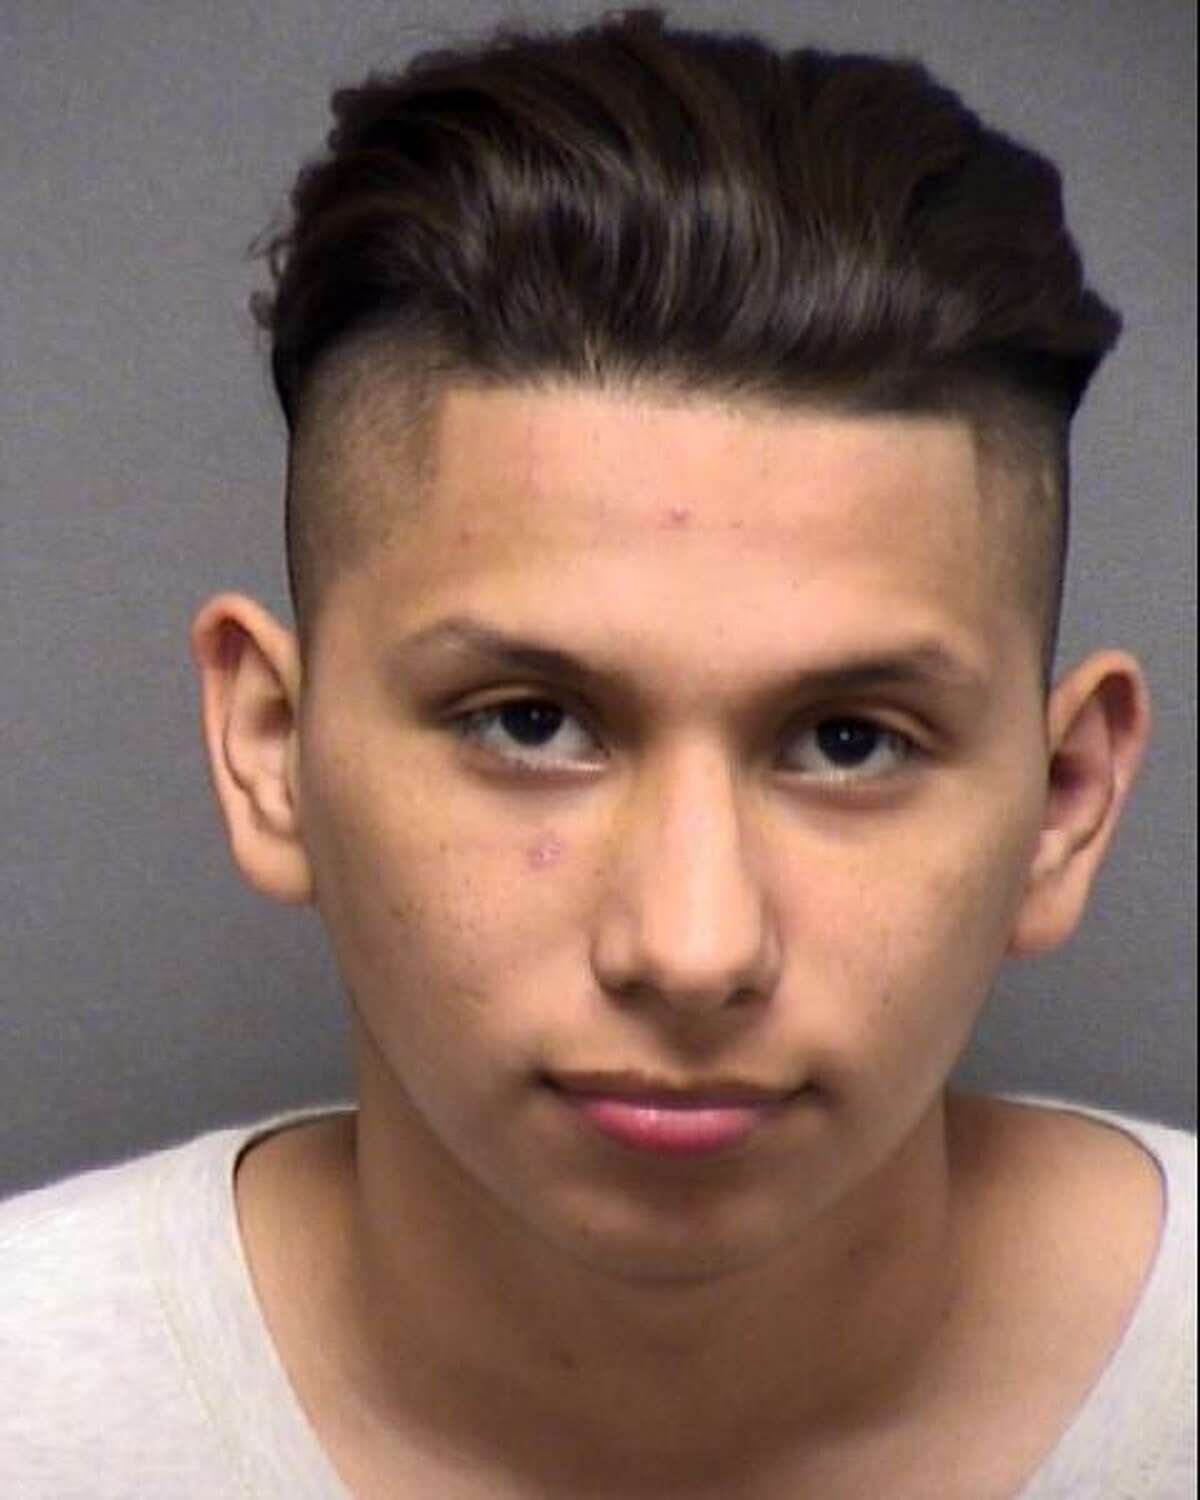 Francisco Garay Jr., 18, is charged with murder after he was arrested Saturday, July 21, 2019, accused of fatally shooting a 22-year-old man. His bail is set at $50,000, according to court records.